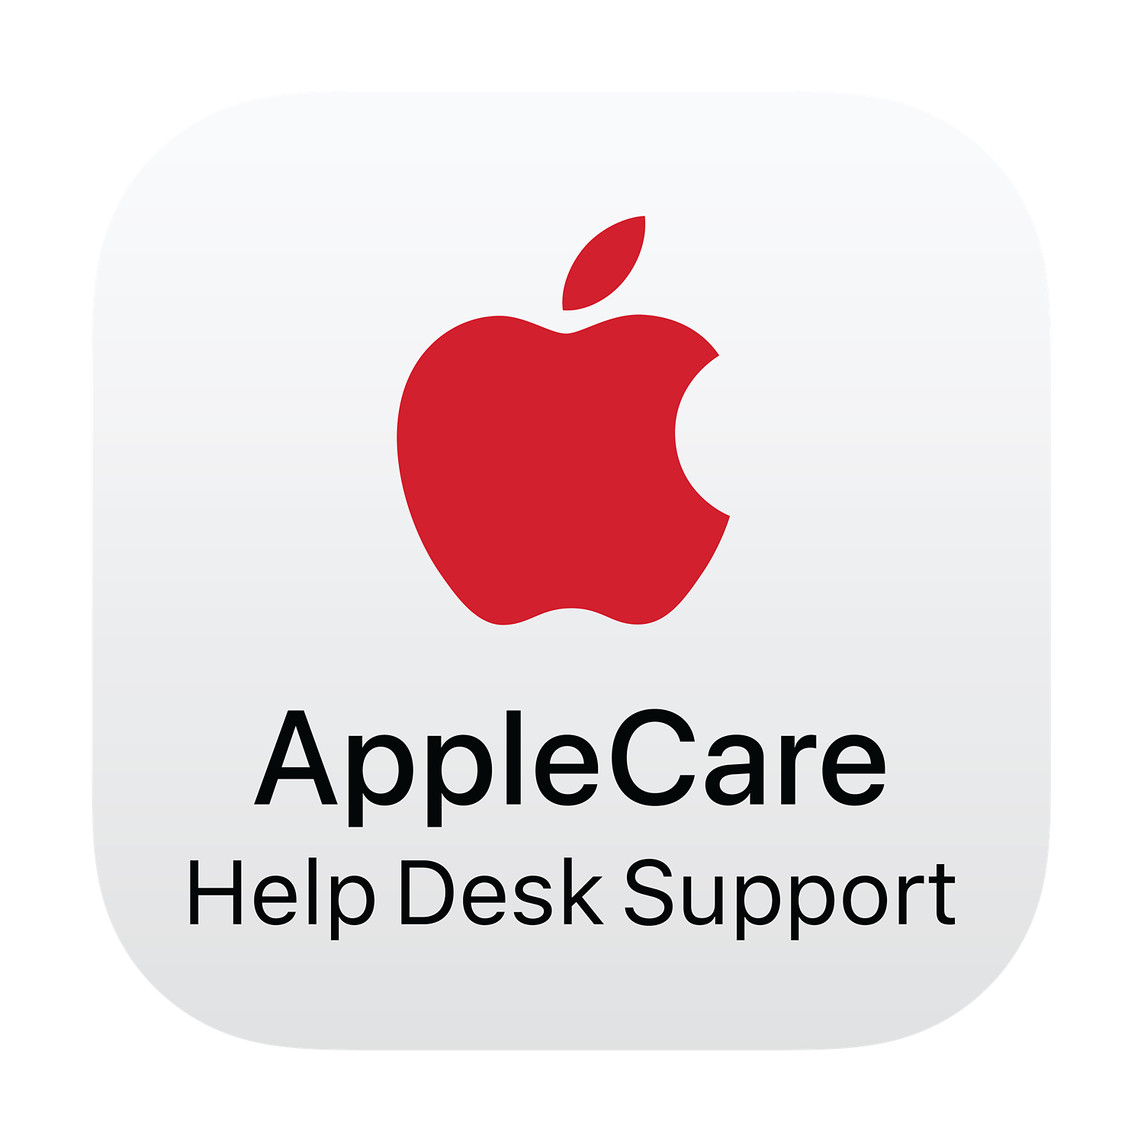 Apple Logo in Red, text reads: AppleCare Help Desk Support